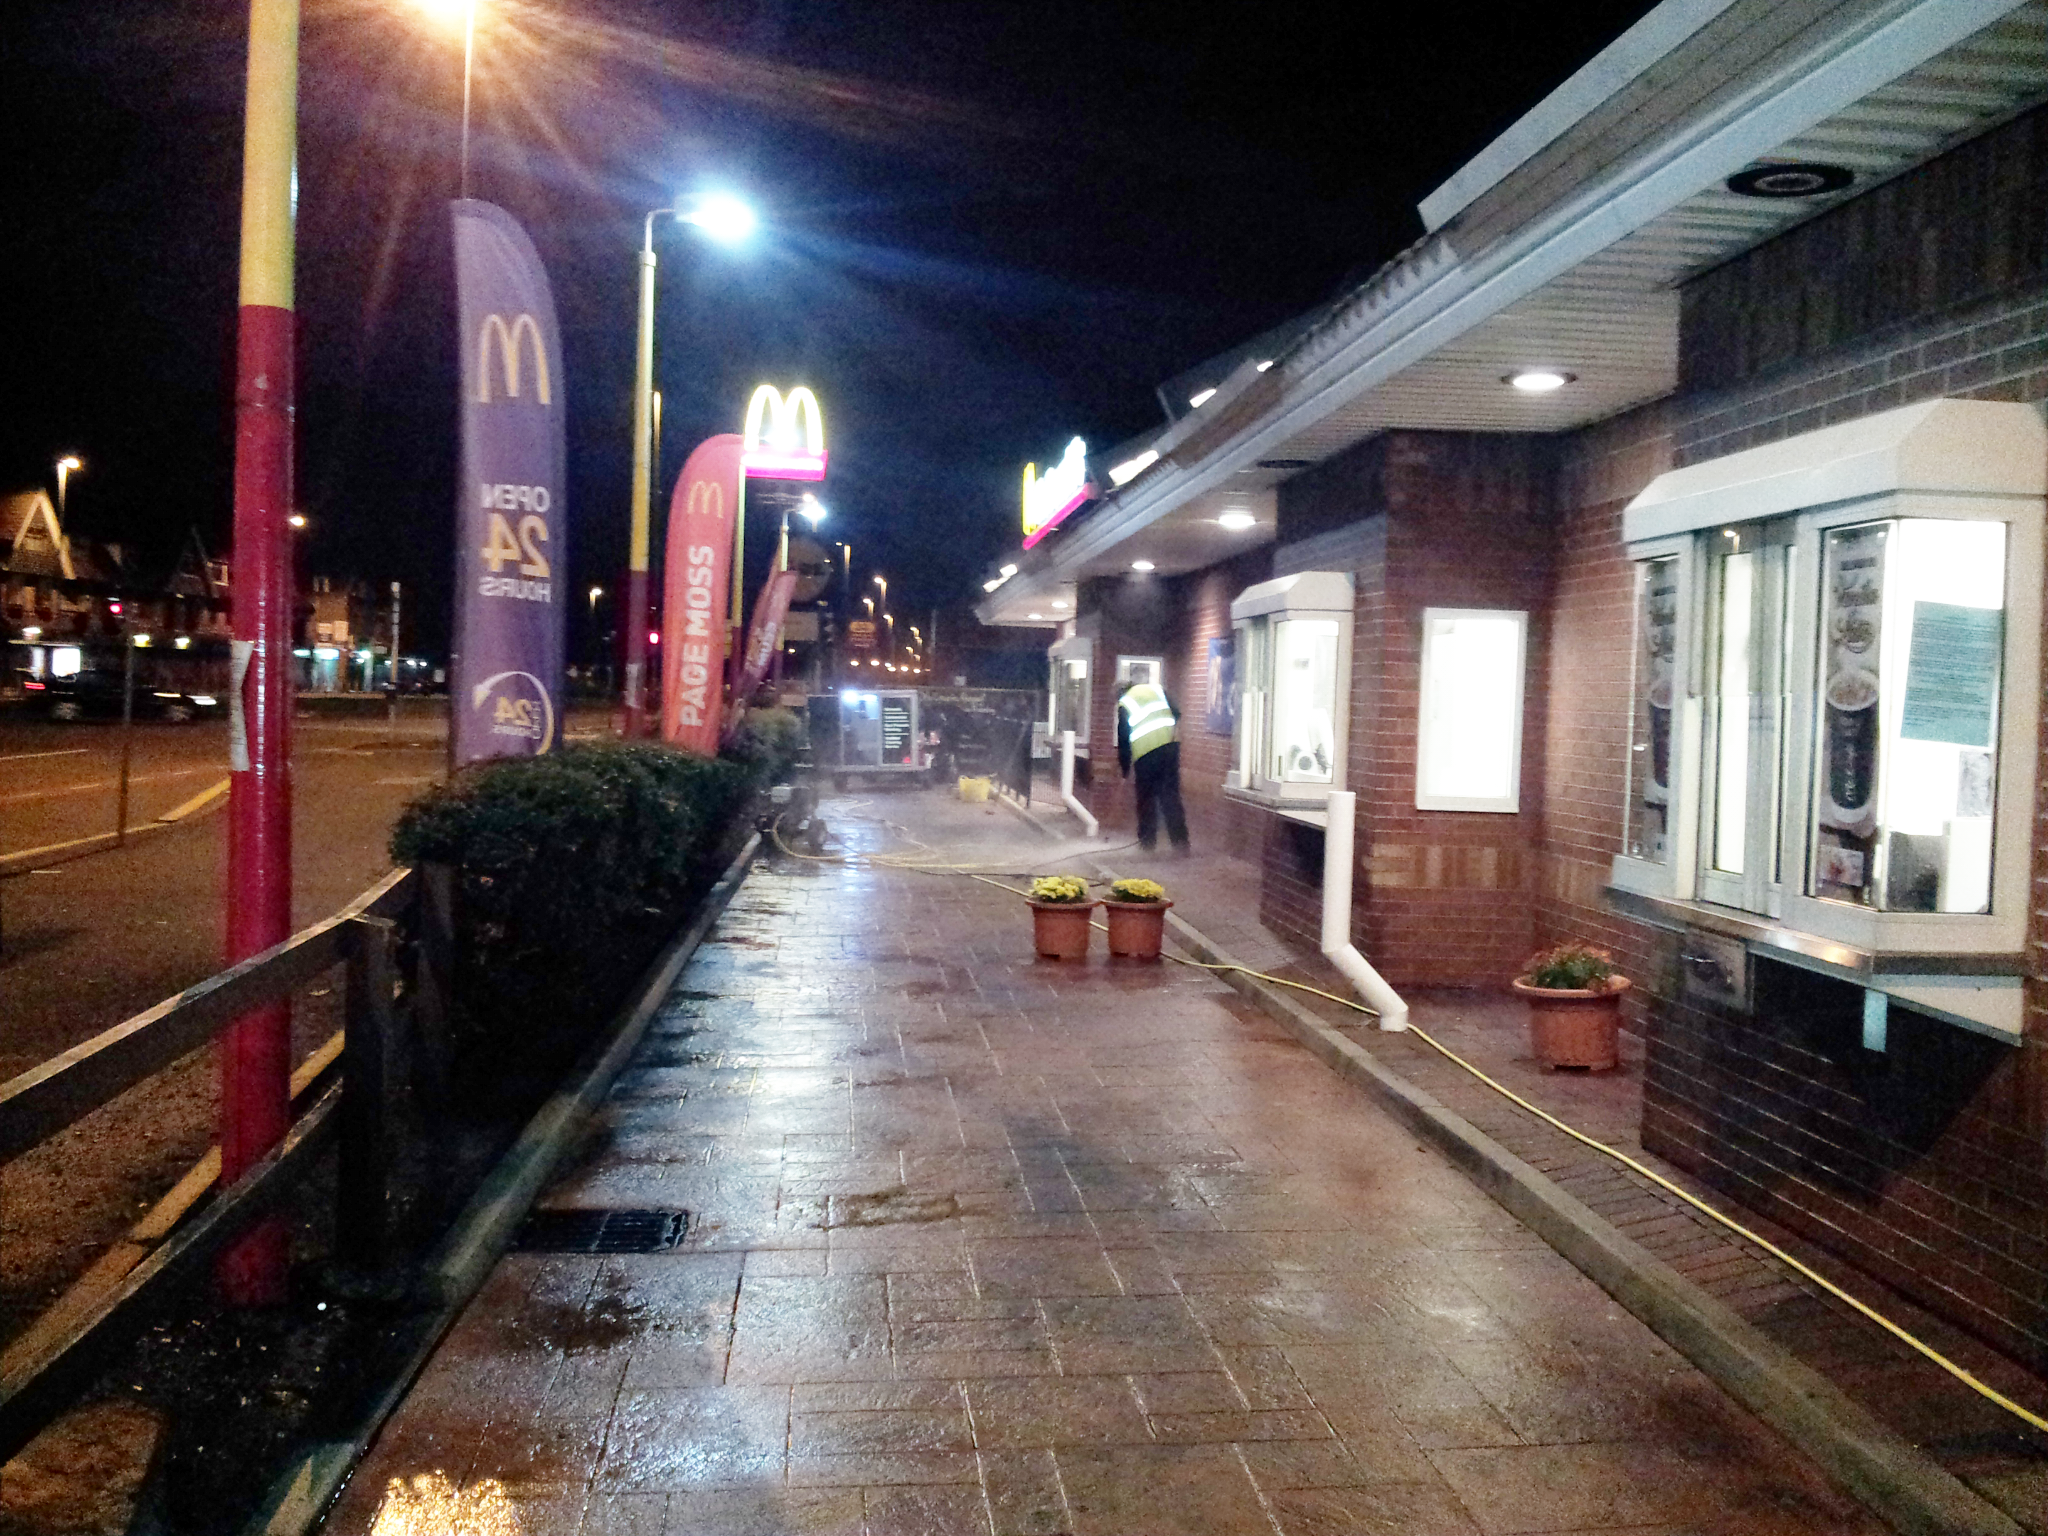 Mcdonalds-Drive-Thru-Cleaning Restaurant & Hotel Cleaning Wirral, Liverpool, Chester